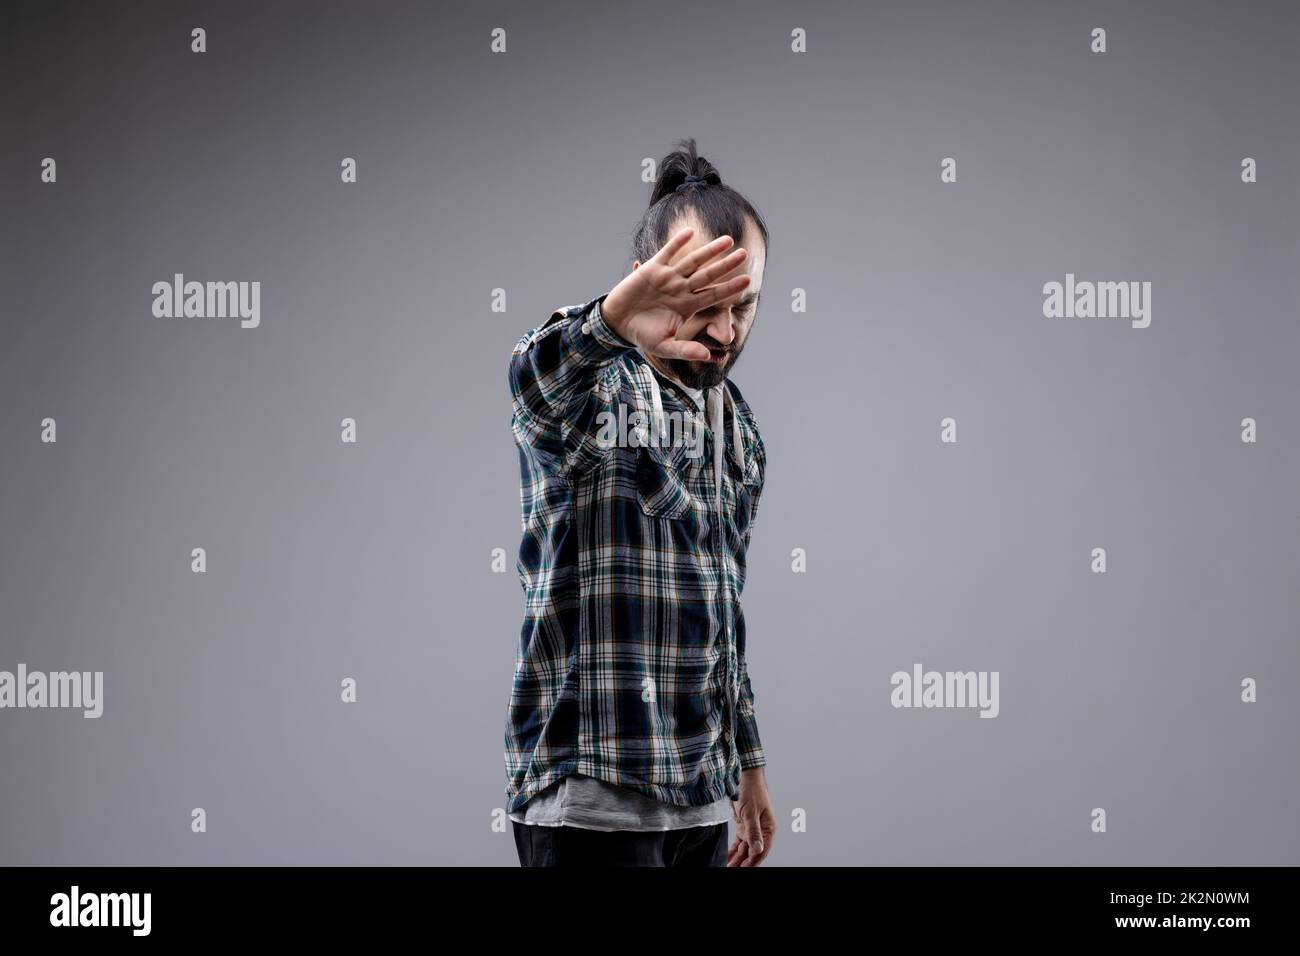 Fed up man holding up his hand in a stop gesture Stock Photo